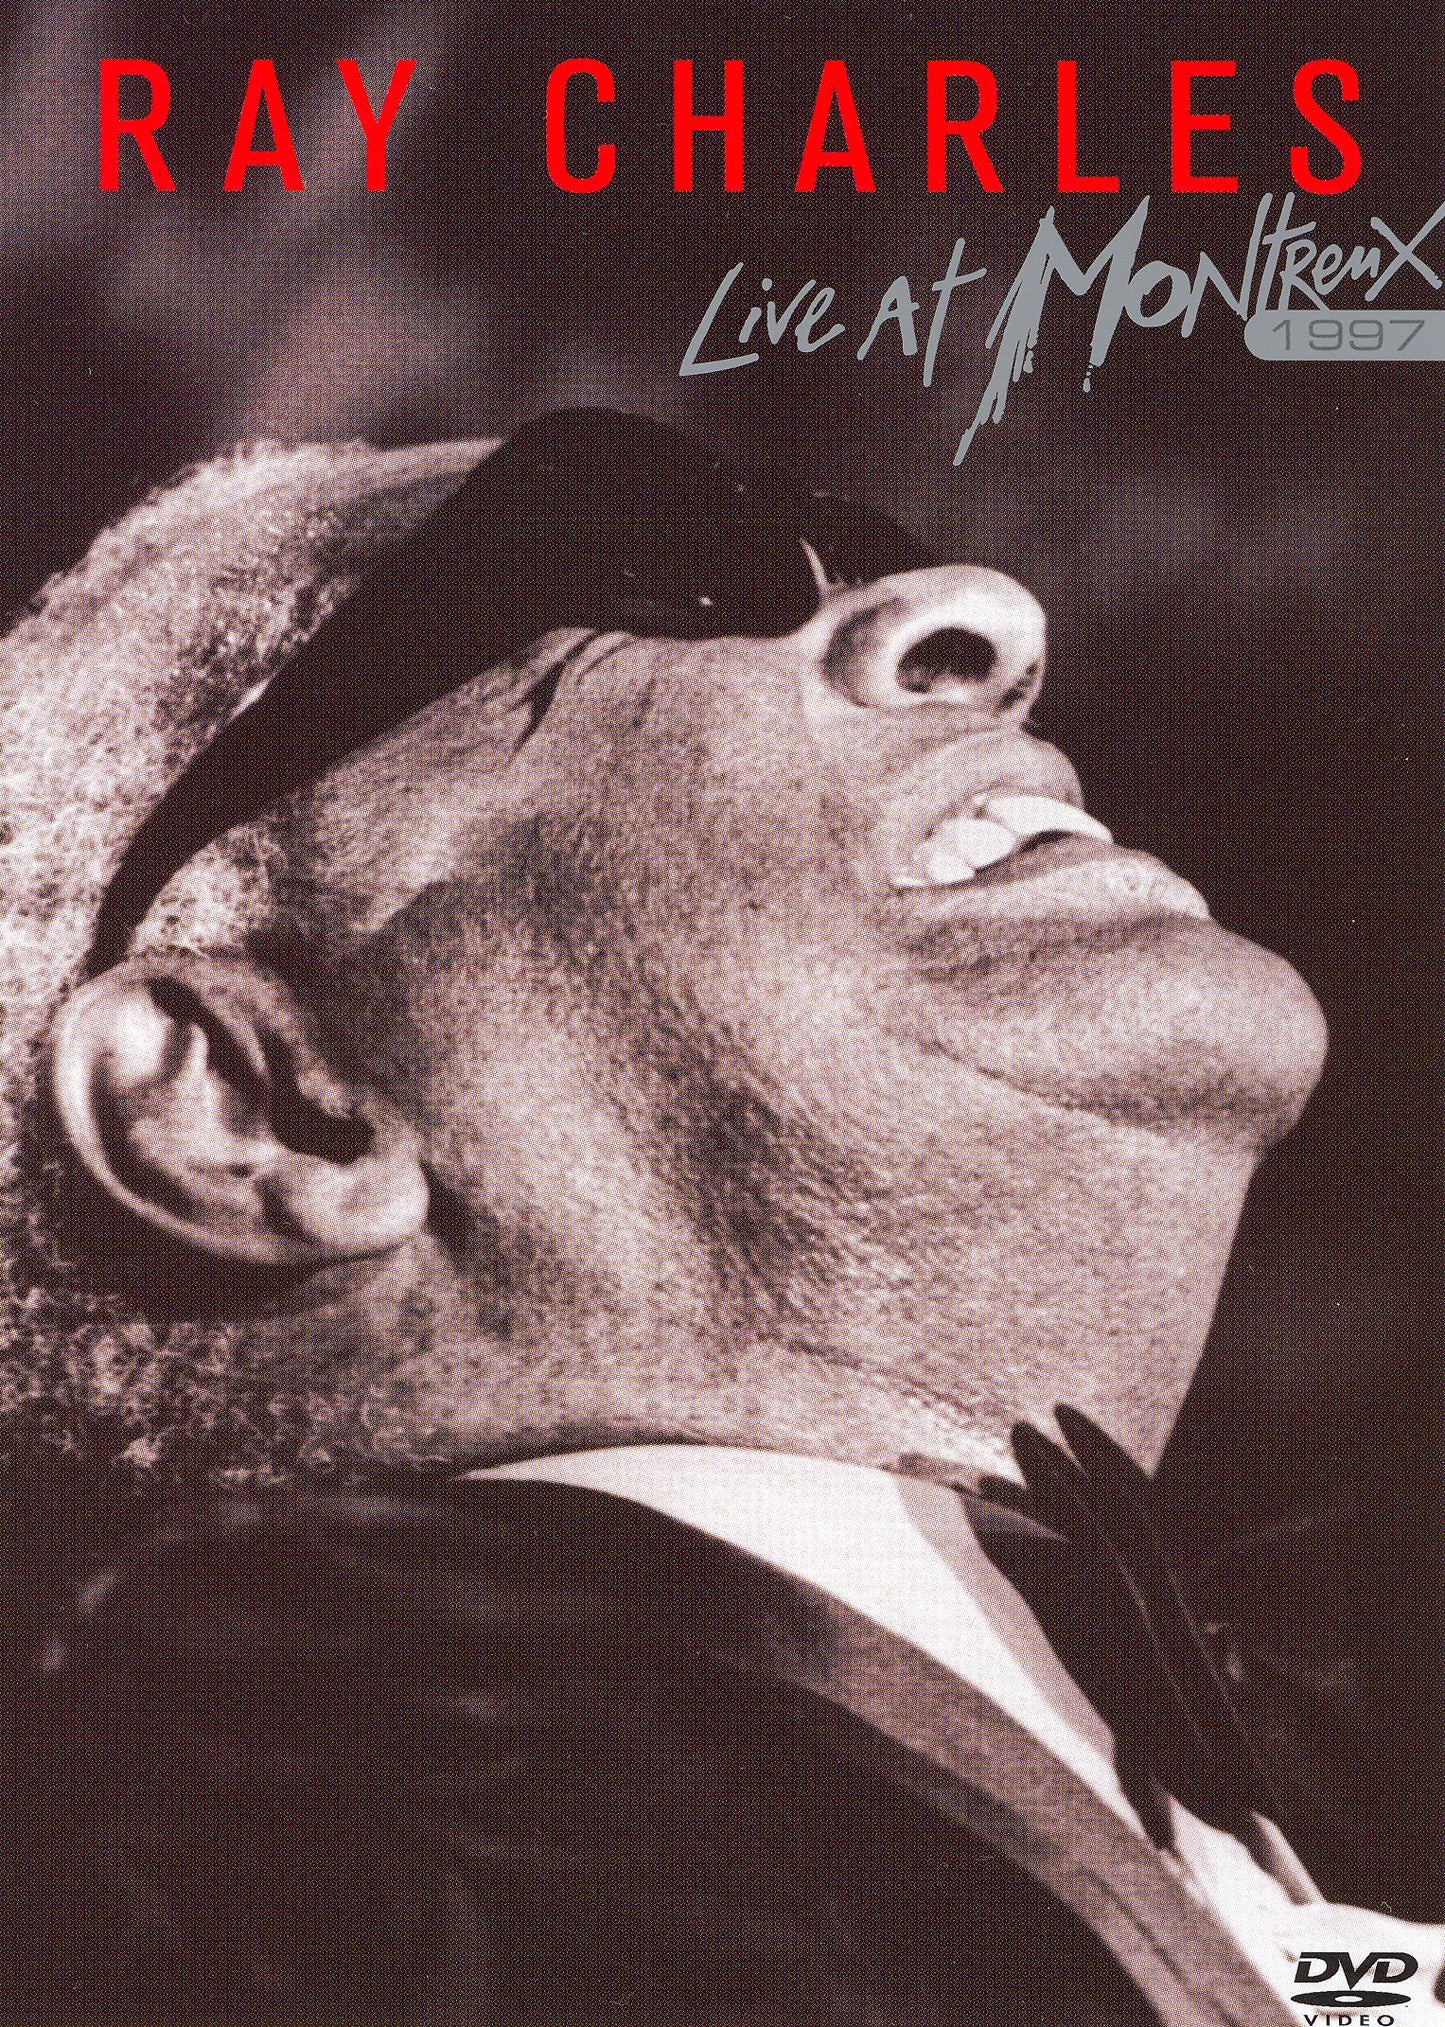 Ray Charles: Live at Montreux cover art